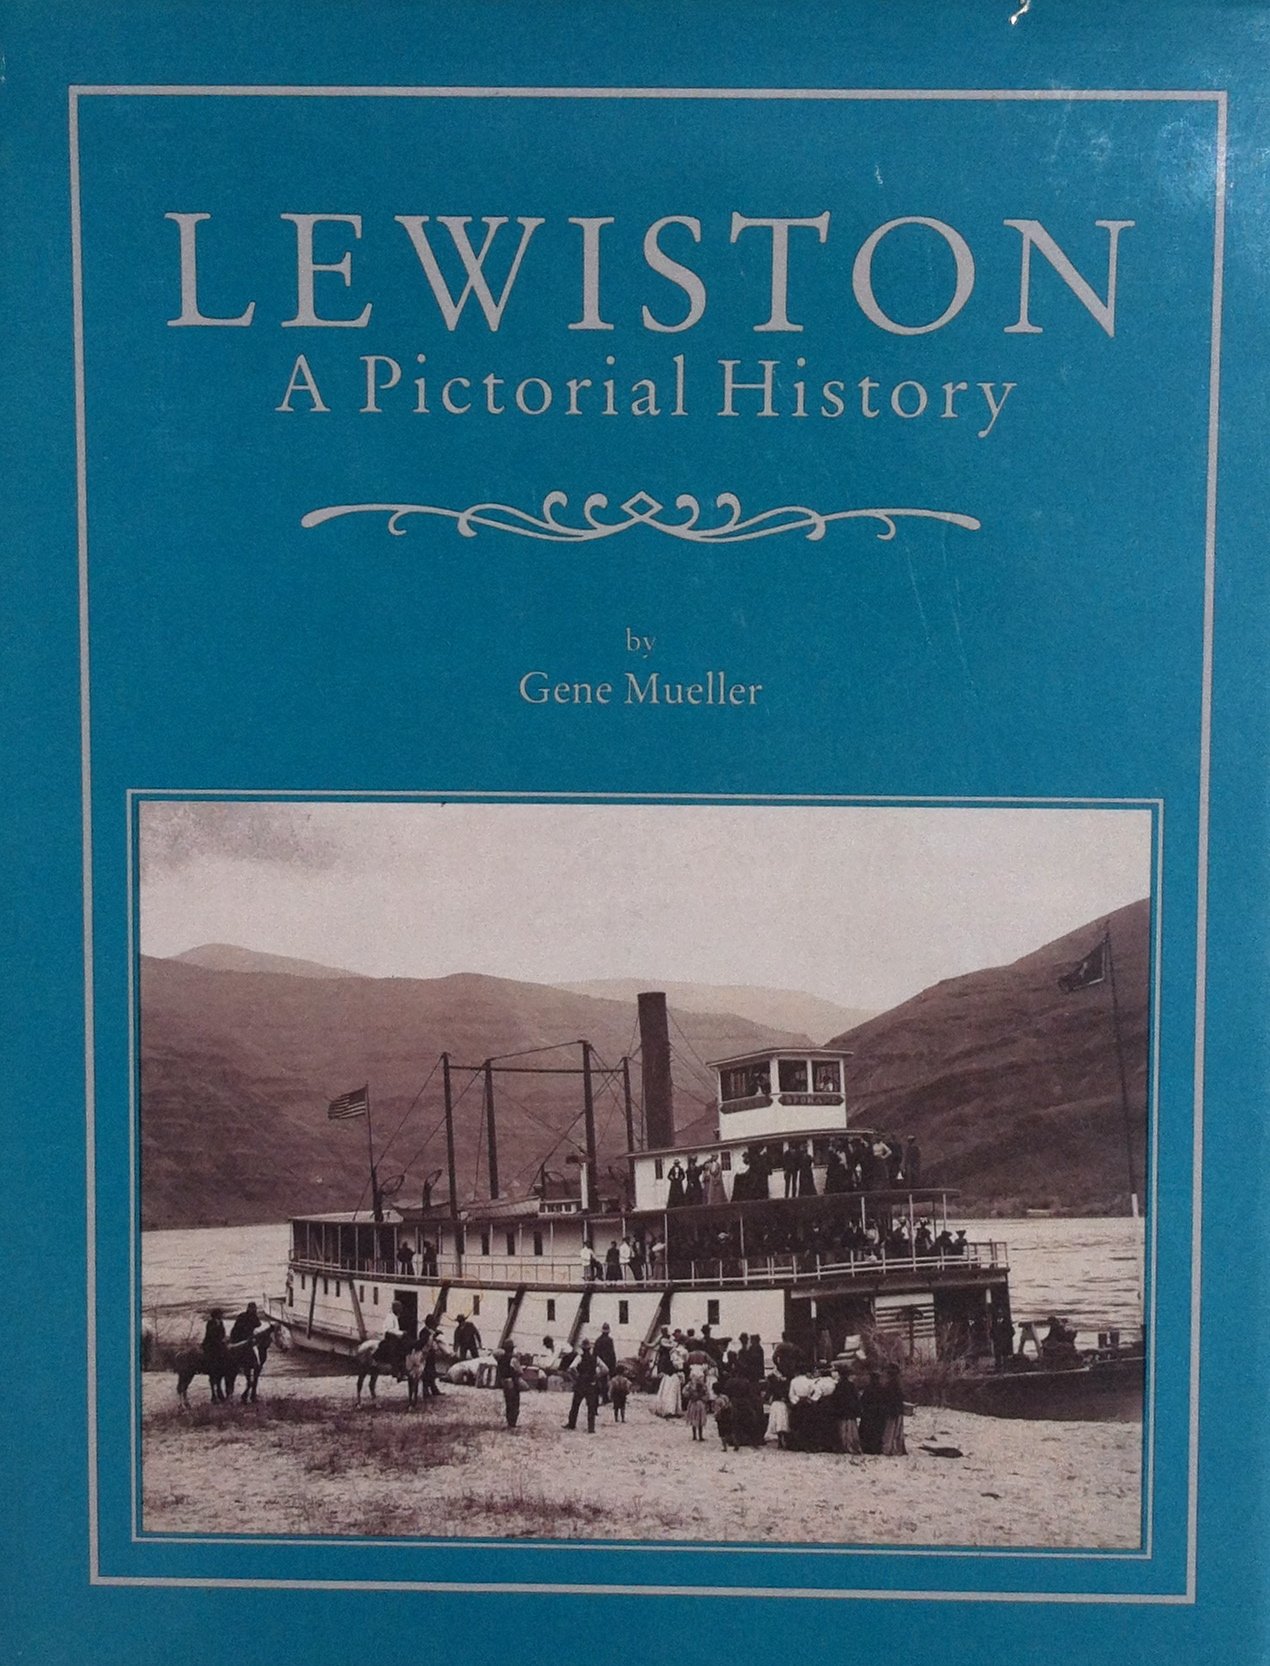 Lewiston: A pictorial history (book cover)